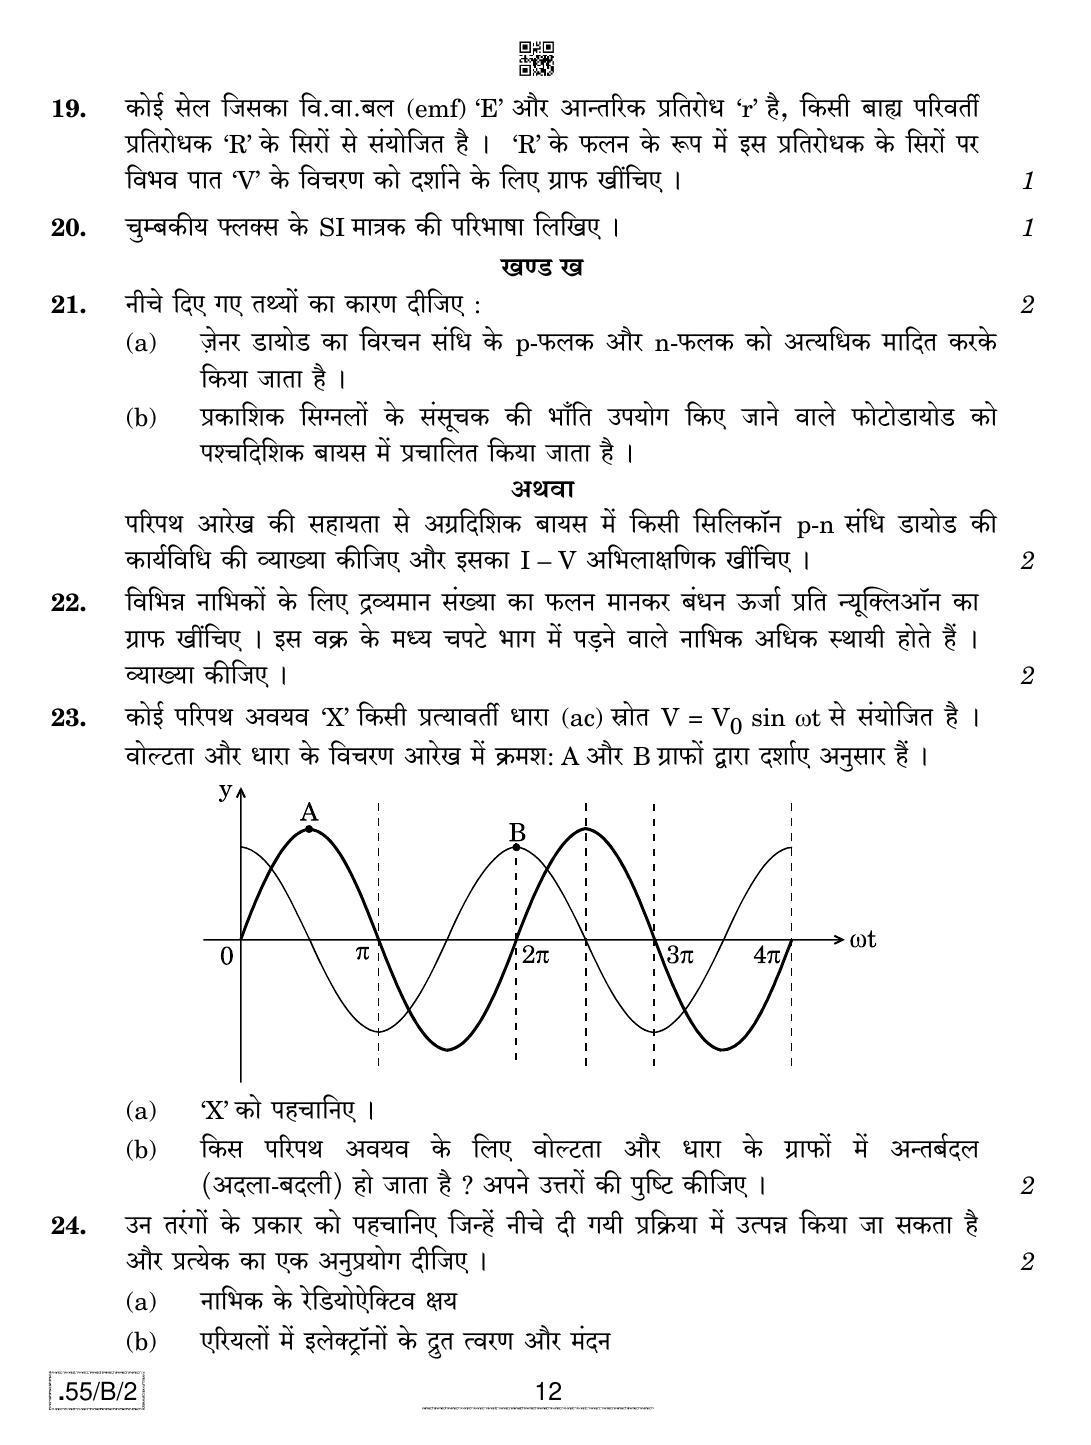 CBSE Class 12 55-C-2 - Physics 2020 Compartment Question Paper - Page 12